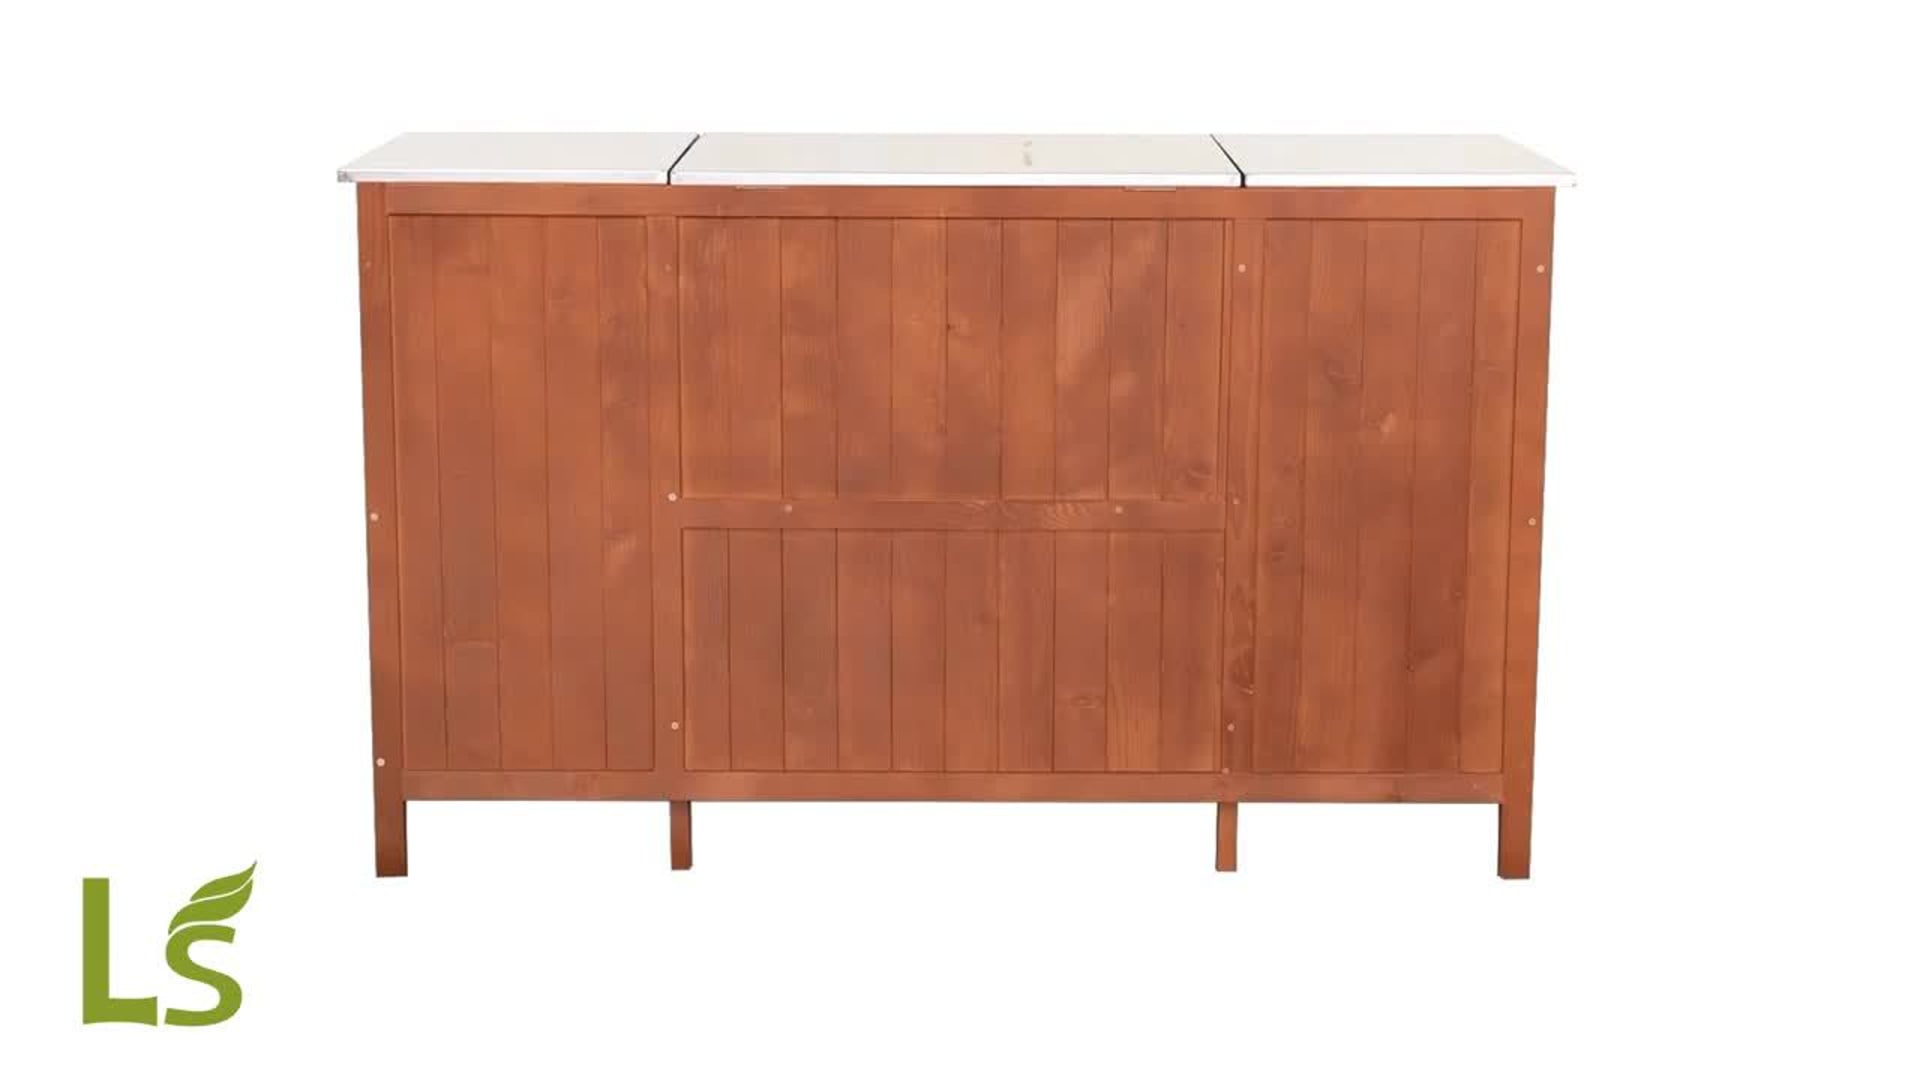 Leisure Season Wood Buffet Server with Cooler Compartment in Medium Brown